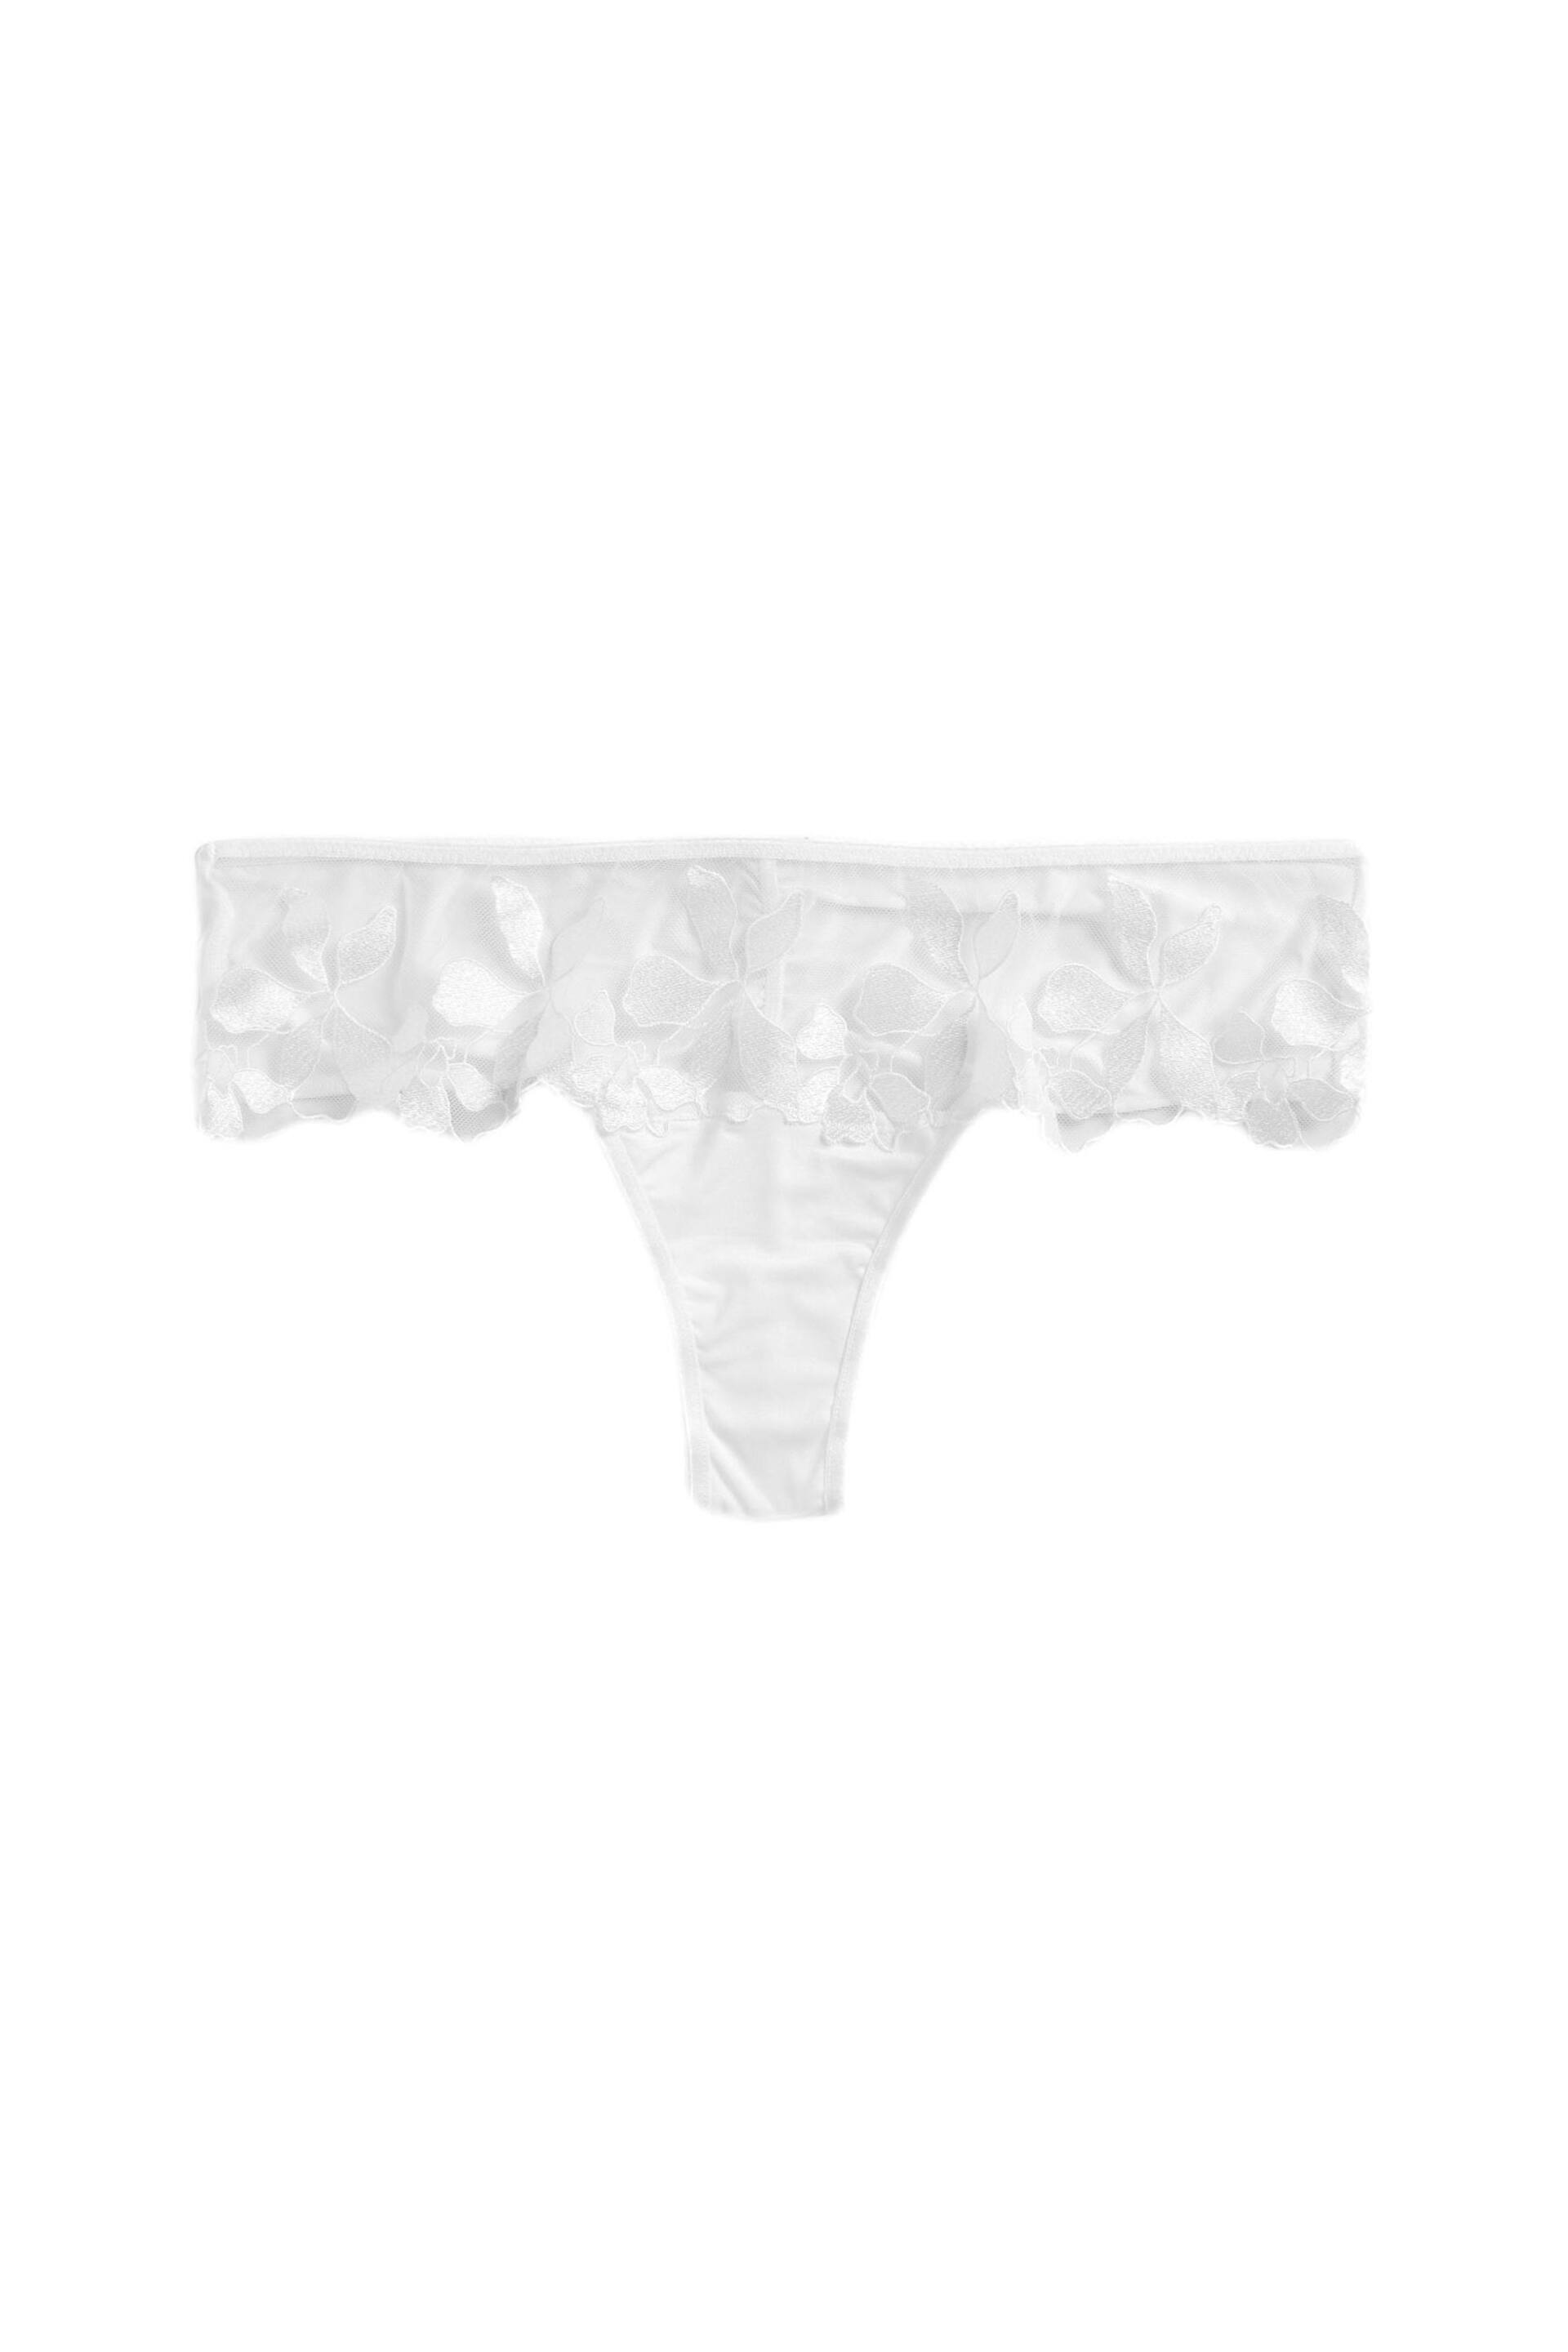 White Brazilian Floral Embroidered Knickers - Image 6 of 7